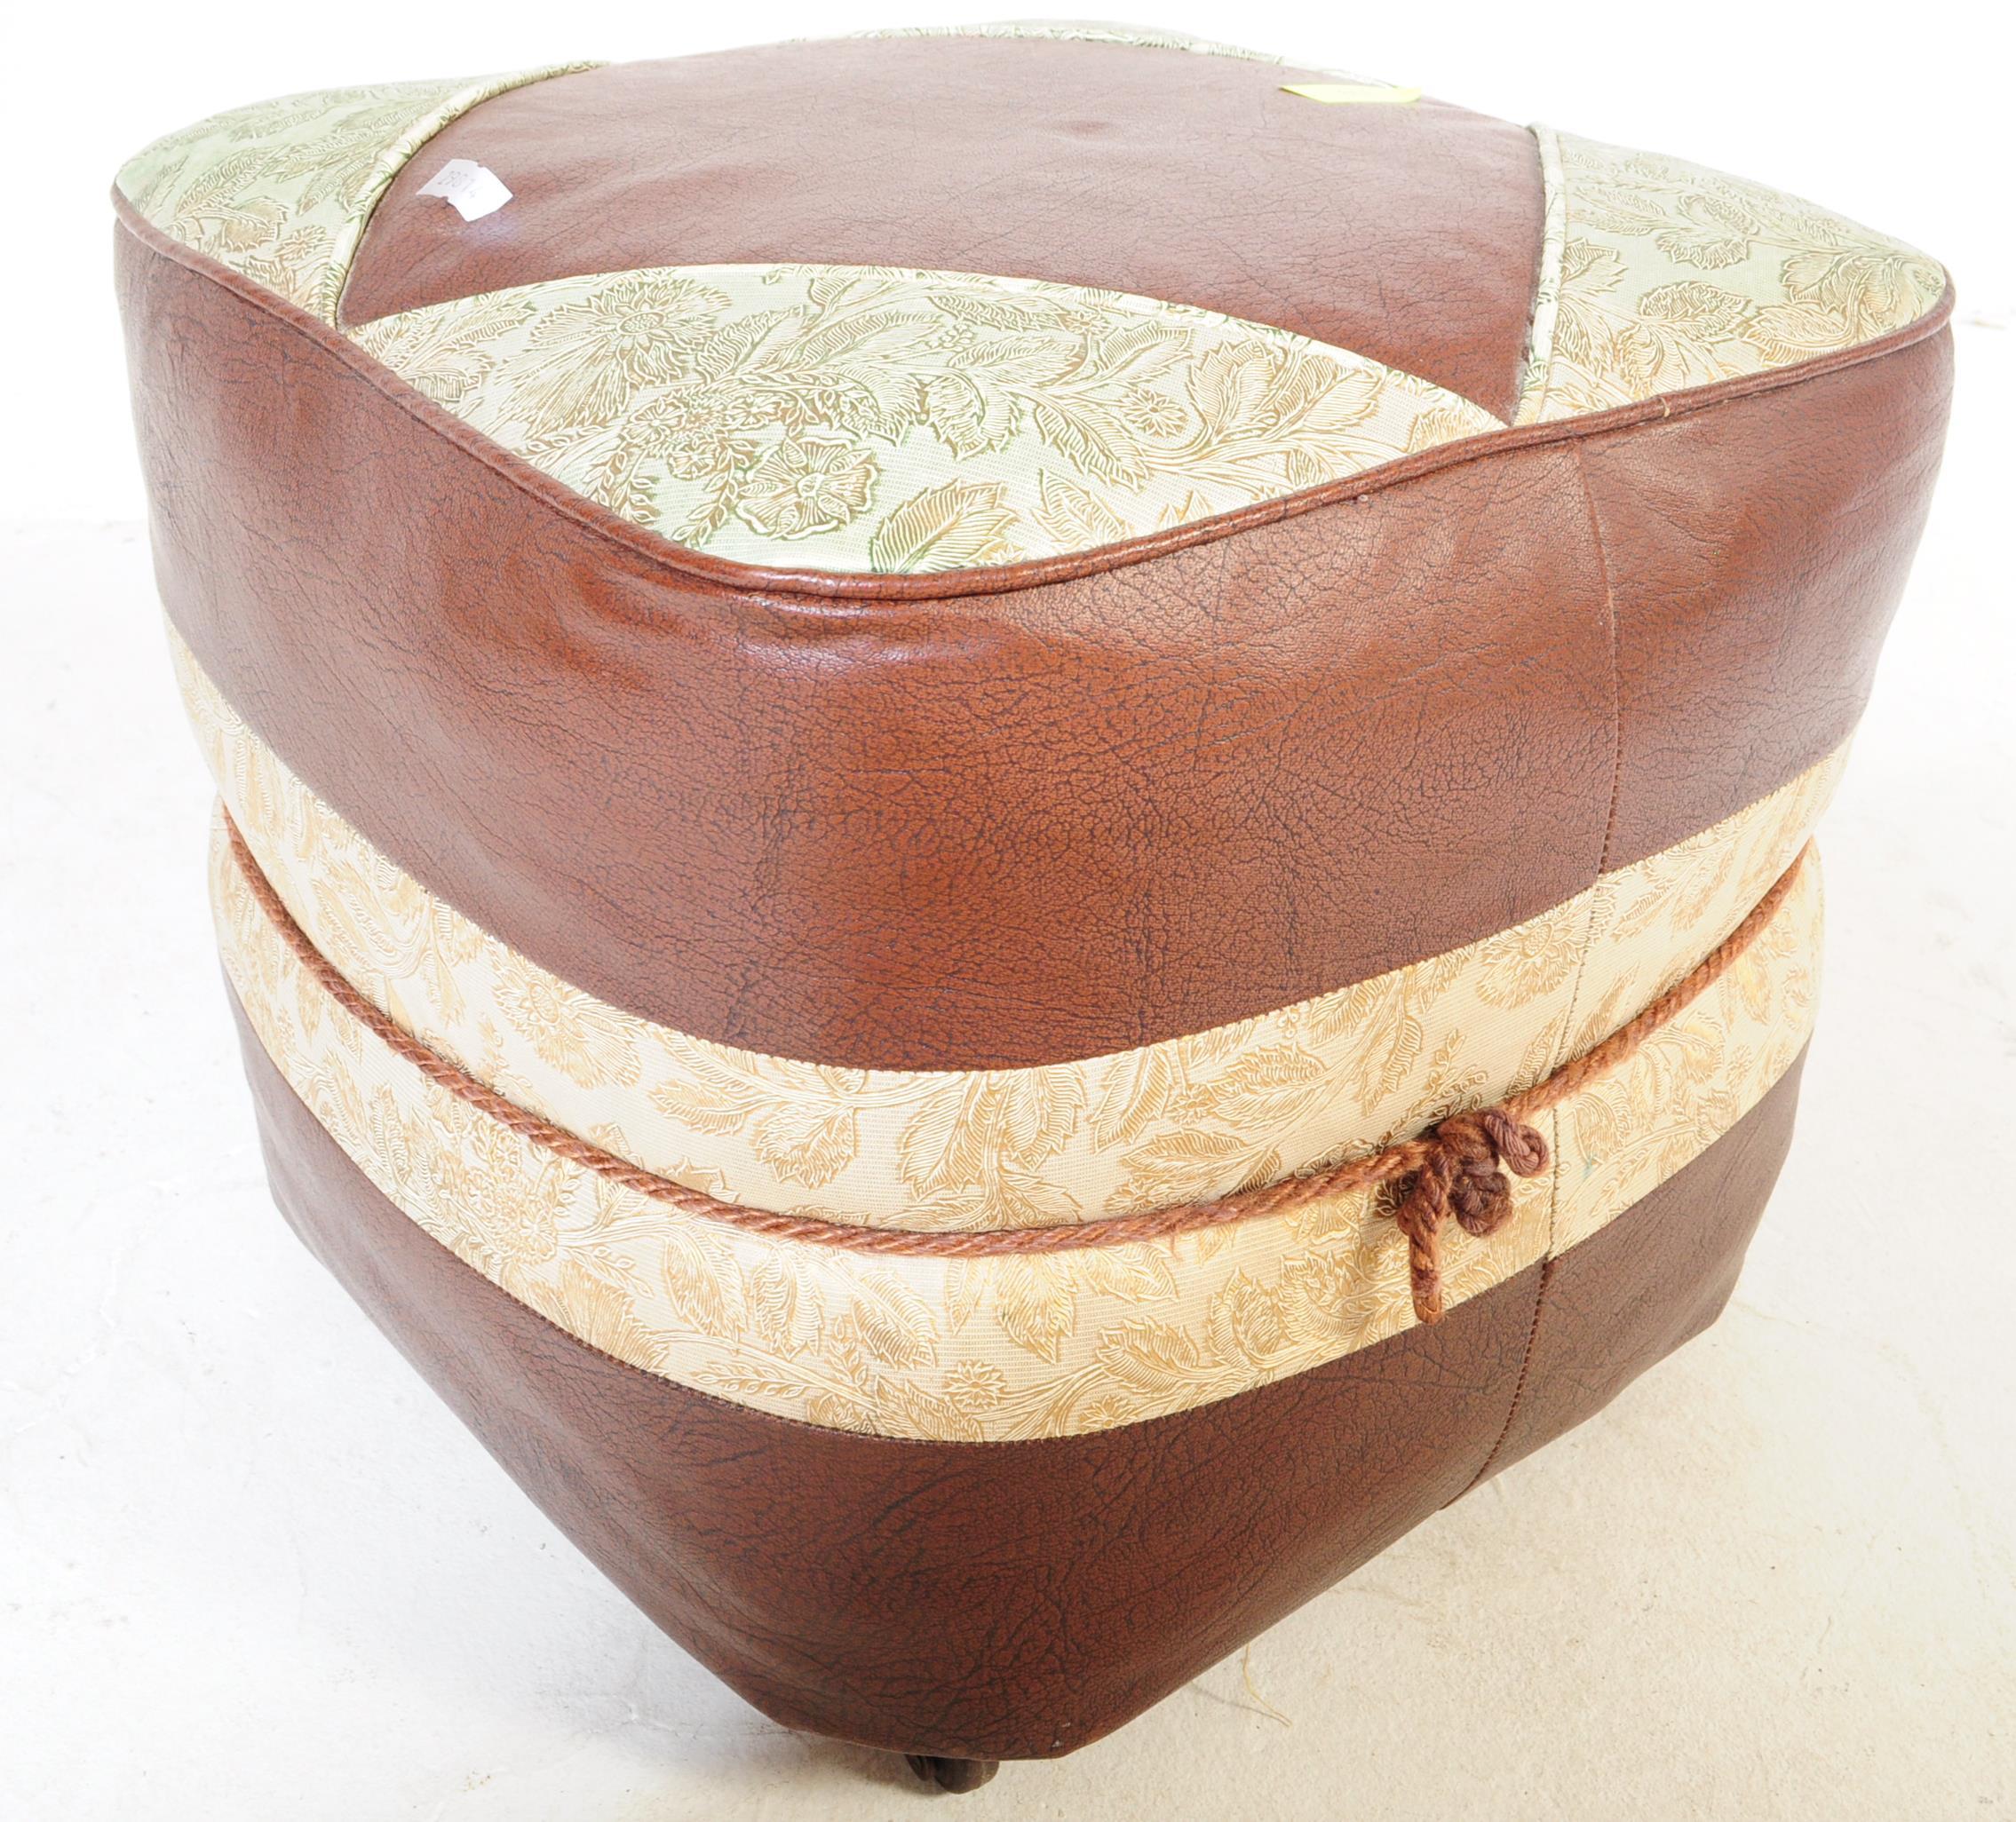 A RETRO VINTAGE BROWN LEATHERETTE PADDED POUF FOOT STOOL - Image 4 of 5